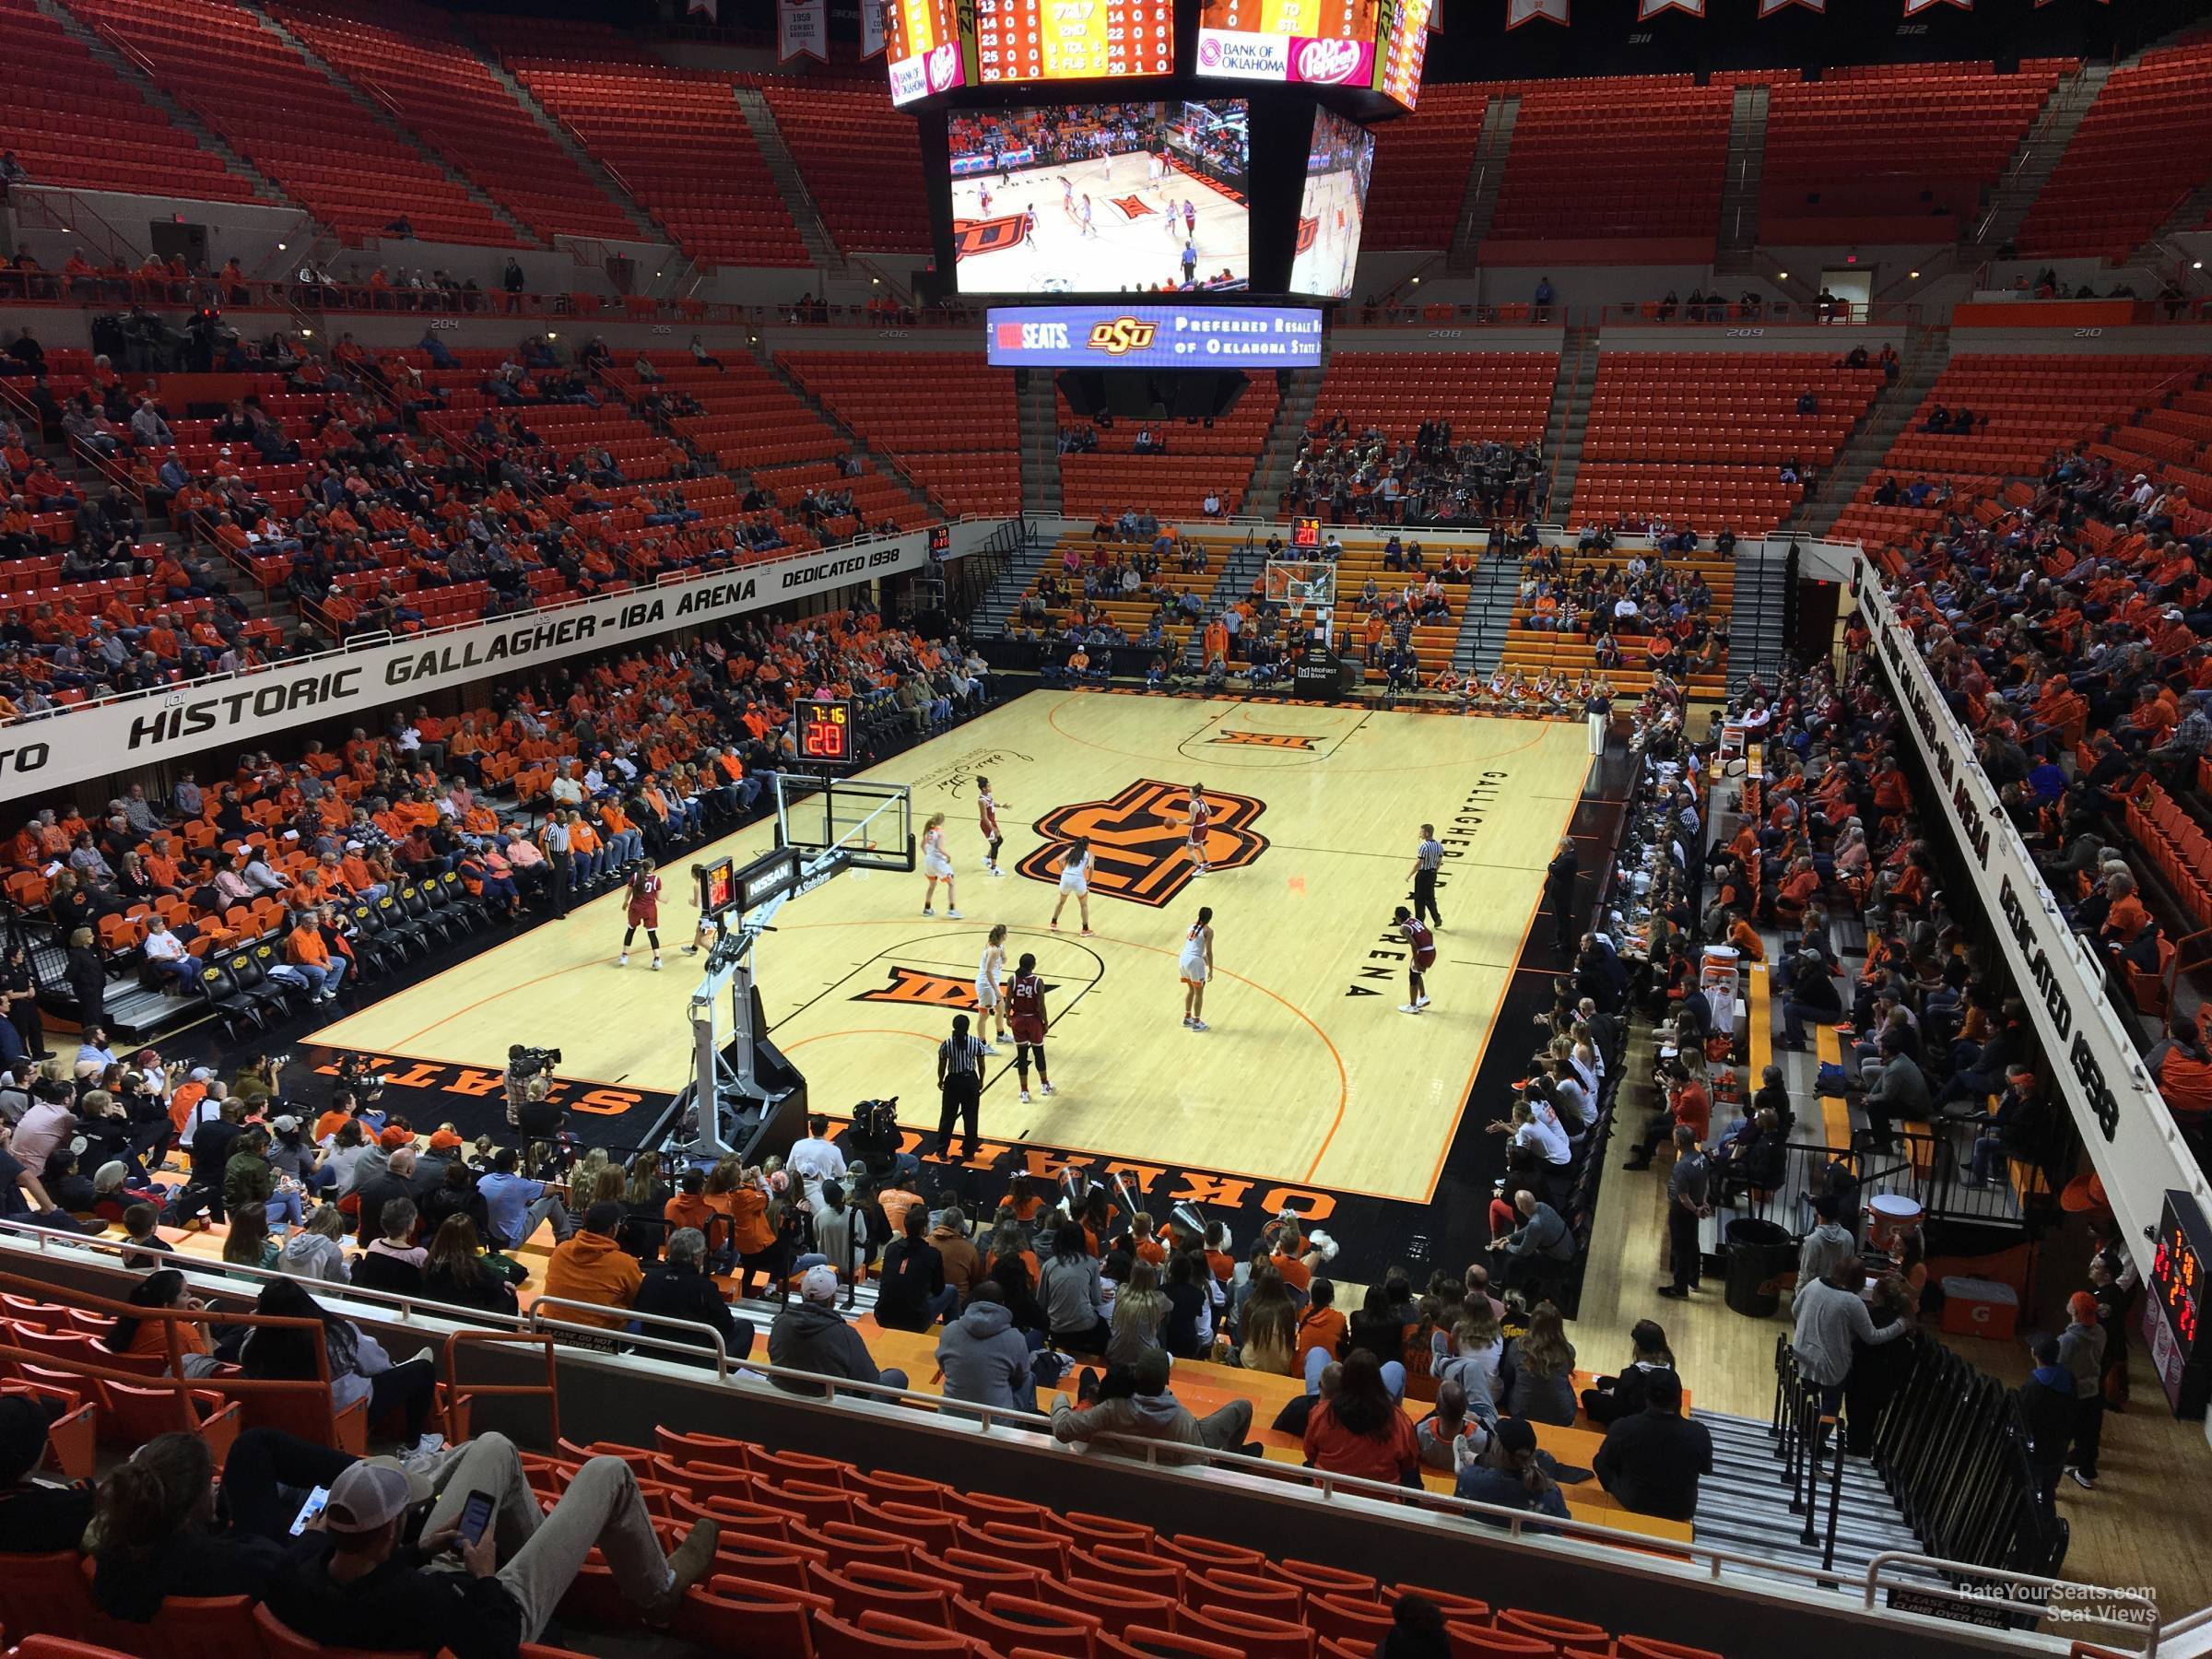 section 217, row 13 seat view  - gallagher-iba arena